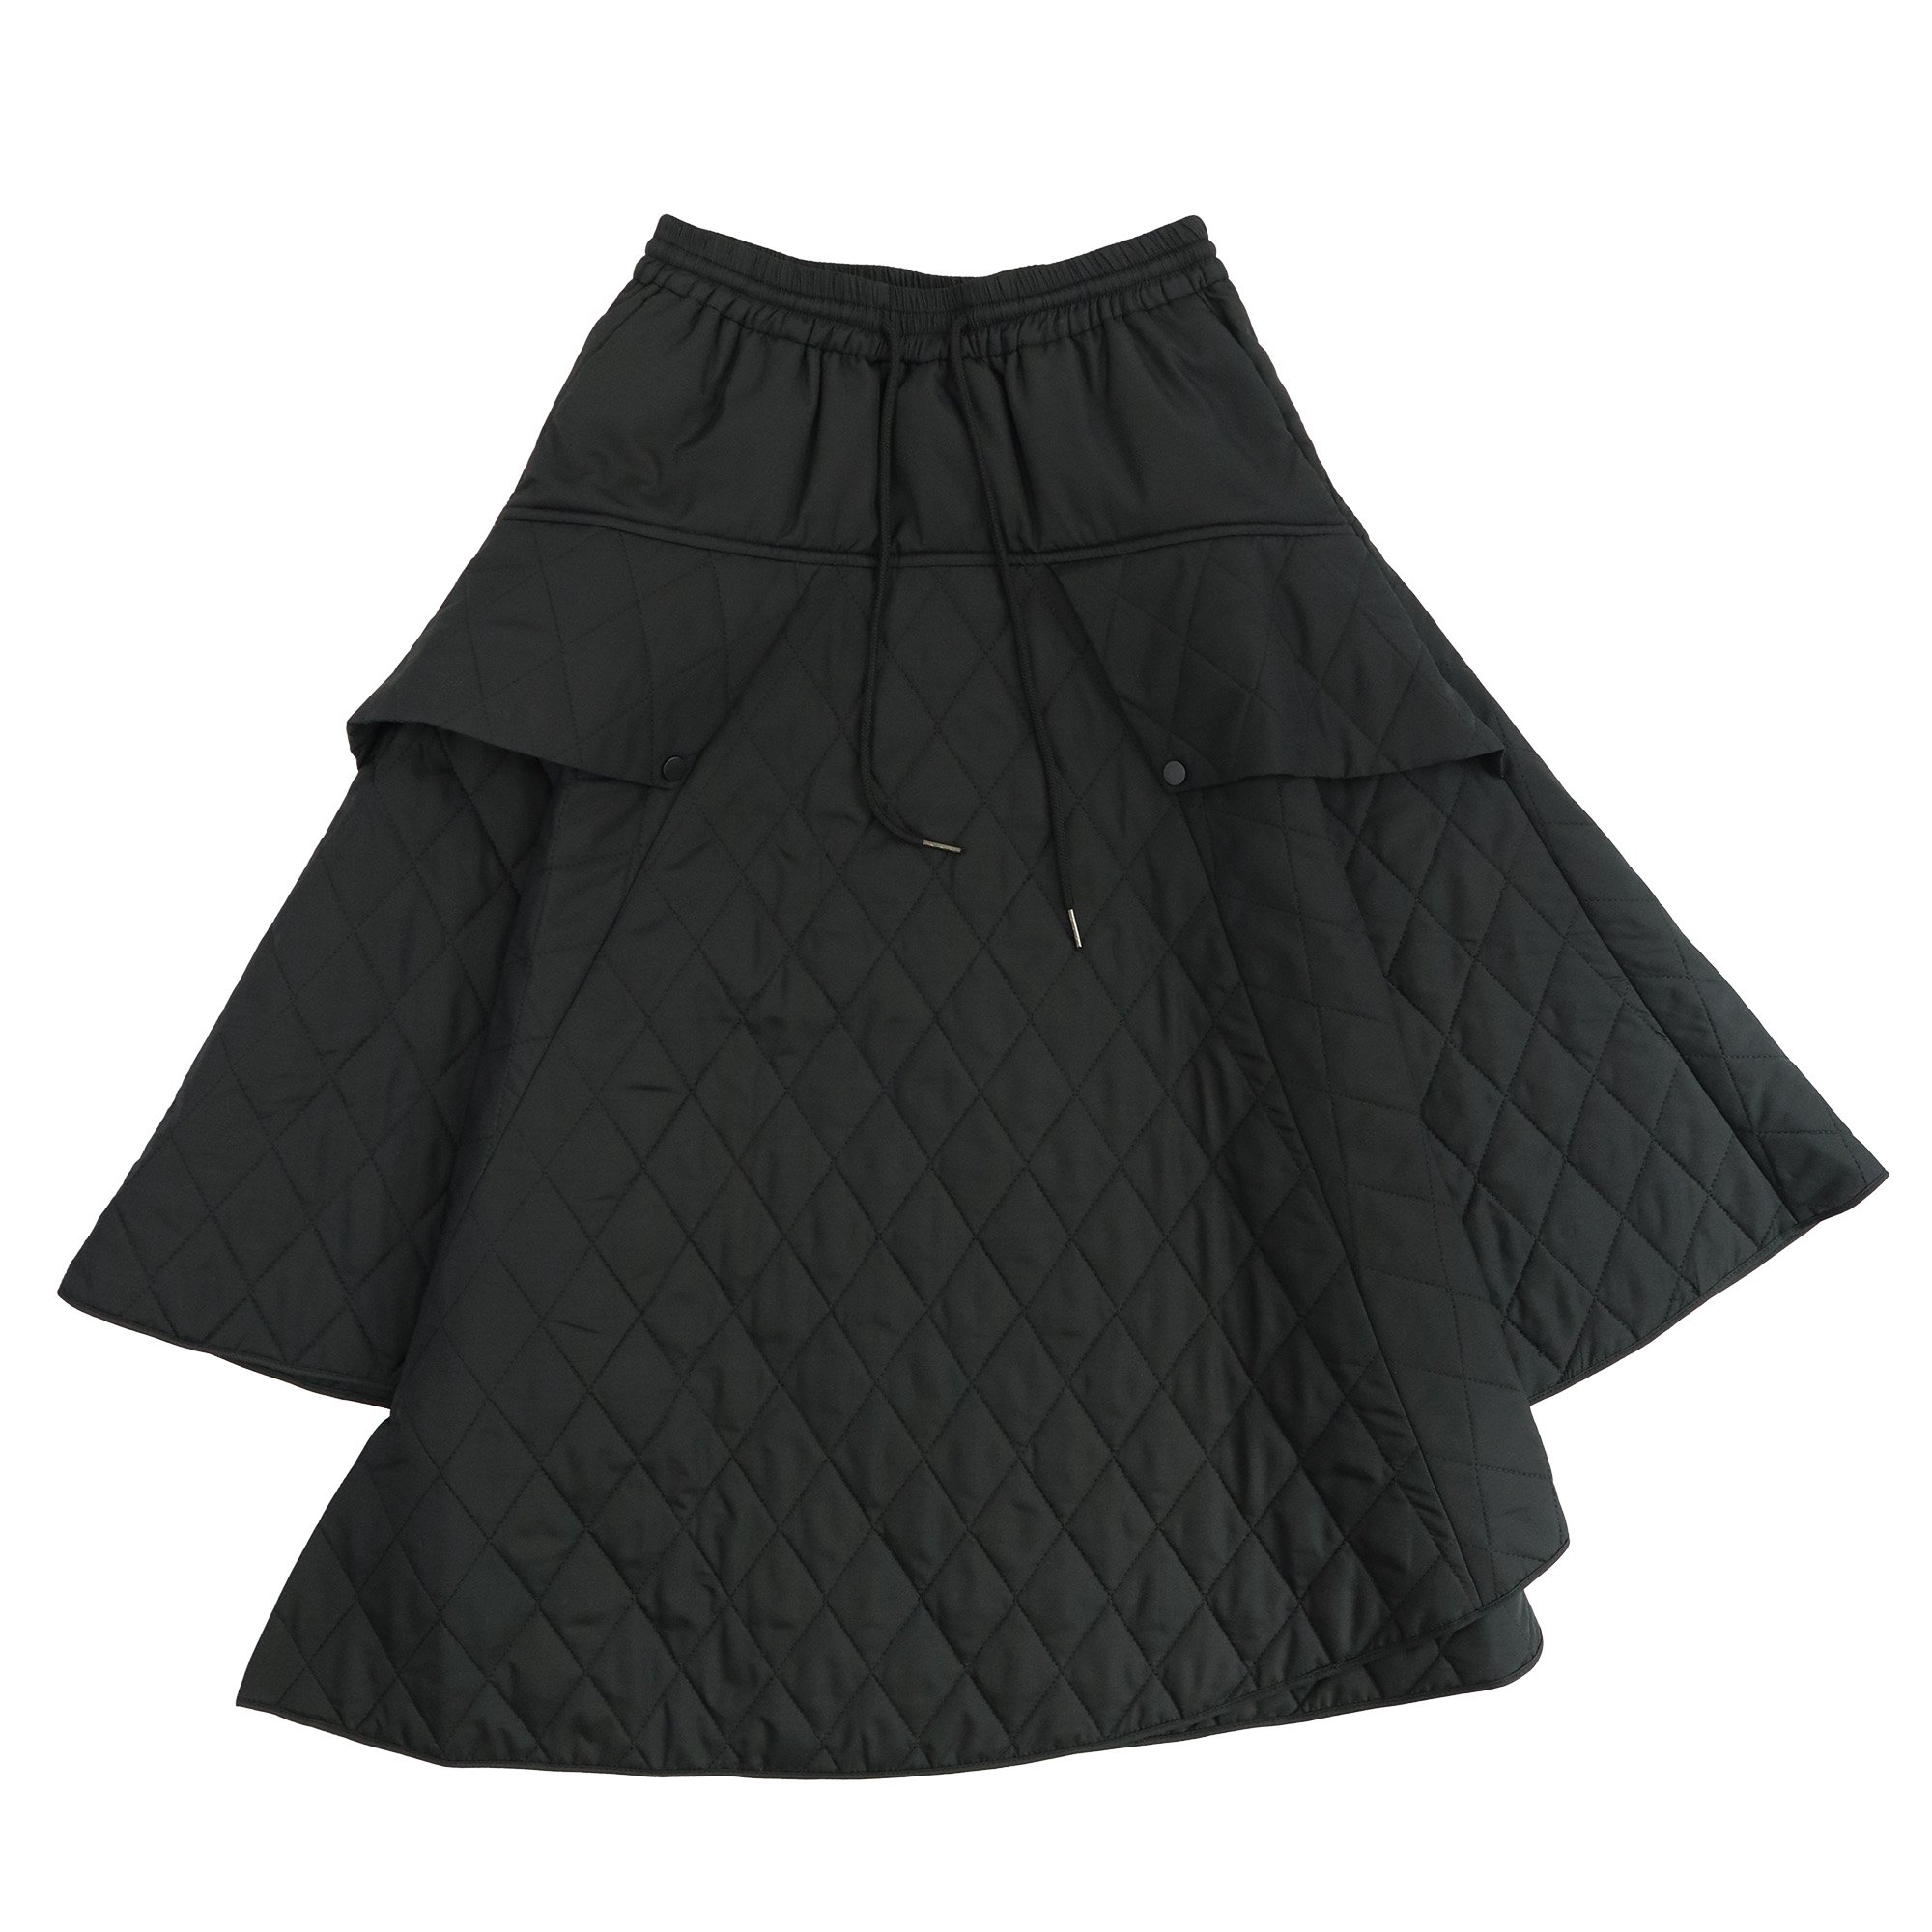 <img class='new_mark_img1' src='https://img.shop-pro.jp/img/new/icons47.gif' style='border:none;display:inline;margin:0px;padding:0px;width:auto;' />BESFXXK WIDE SKIRT【BLACK】